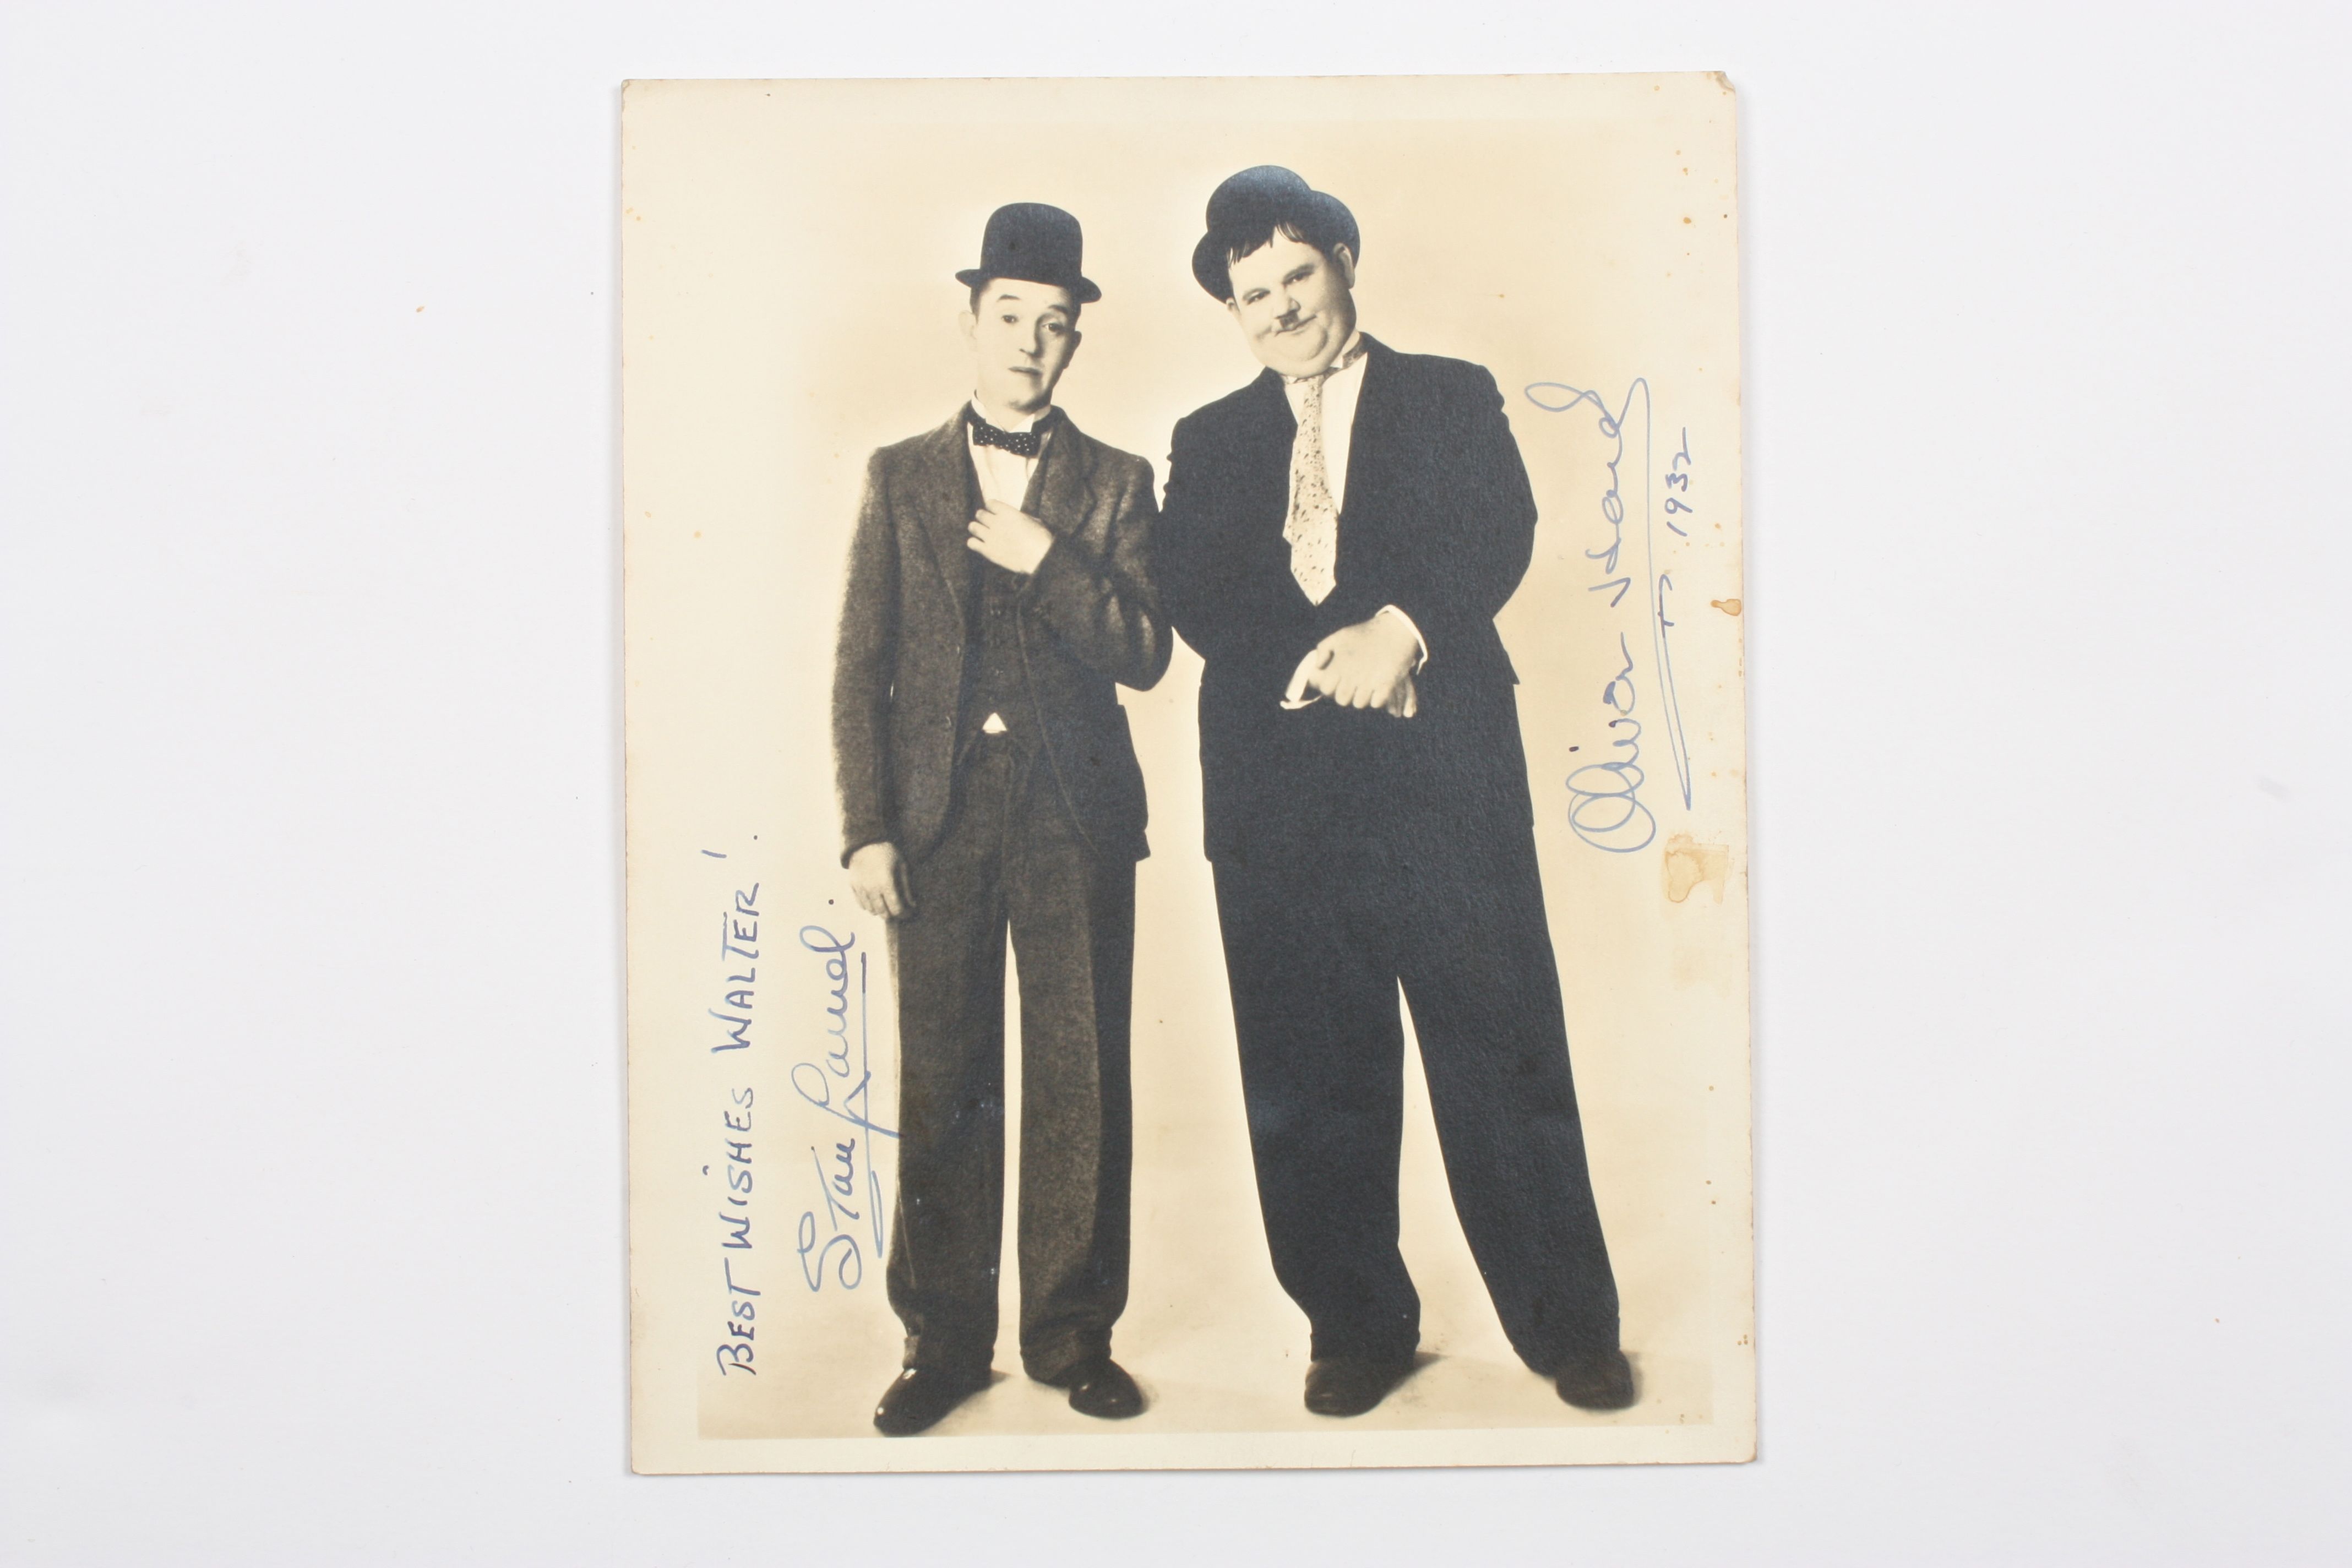 A Laurel & Hardy signed photograph
A signed photo of the comedy duo, gifted to Mr. Walter James